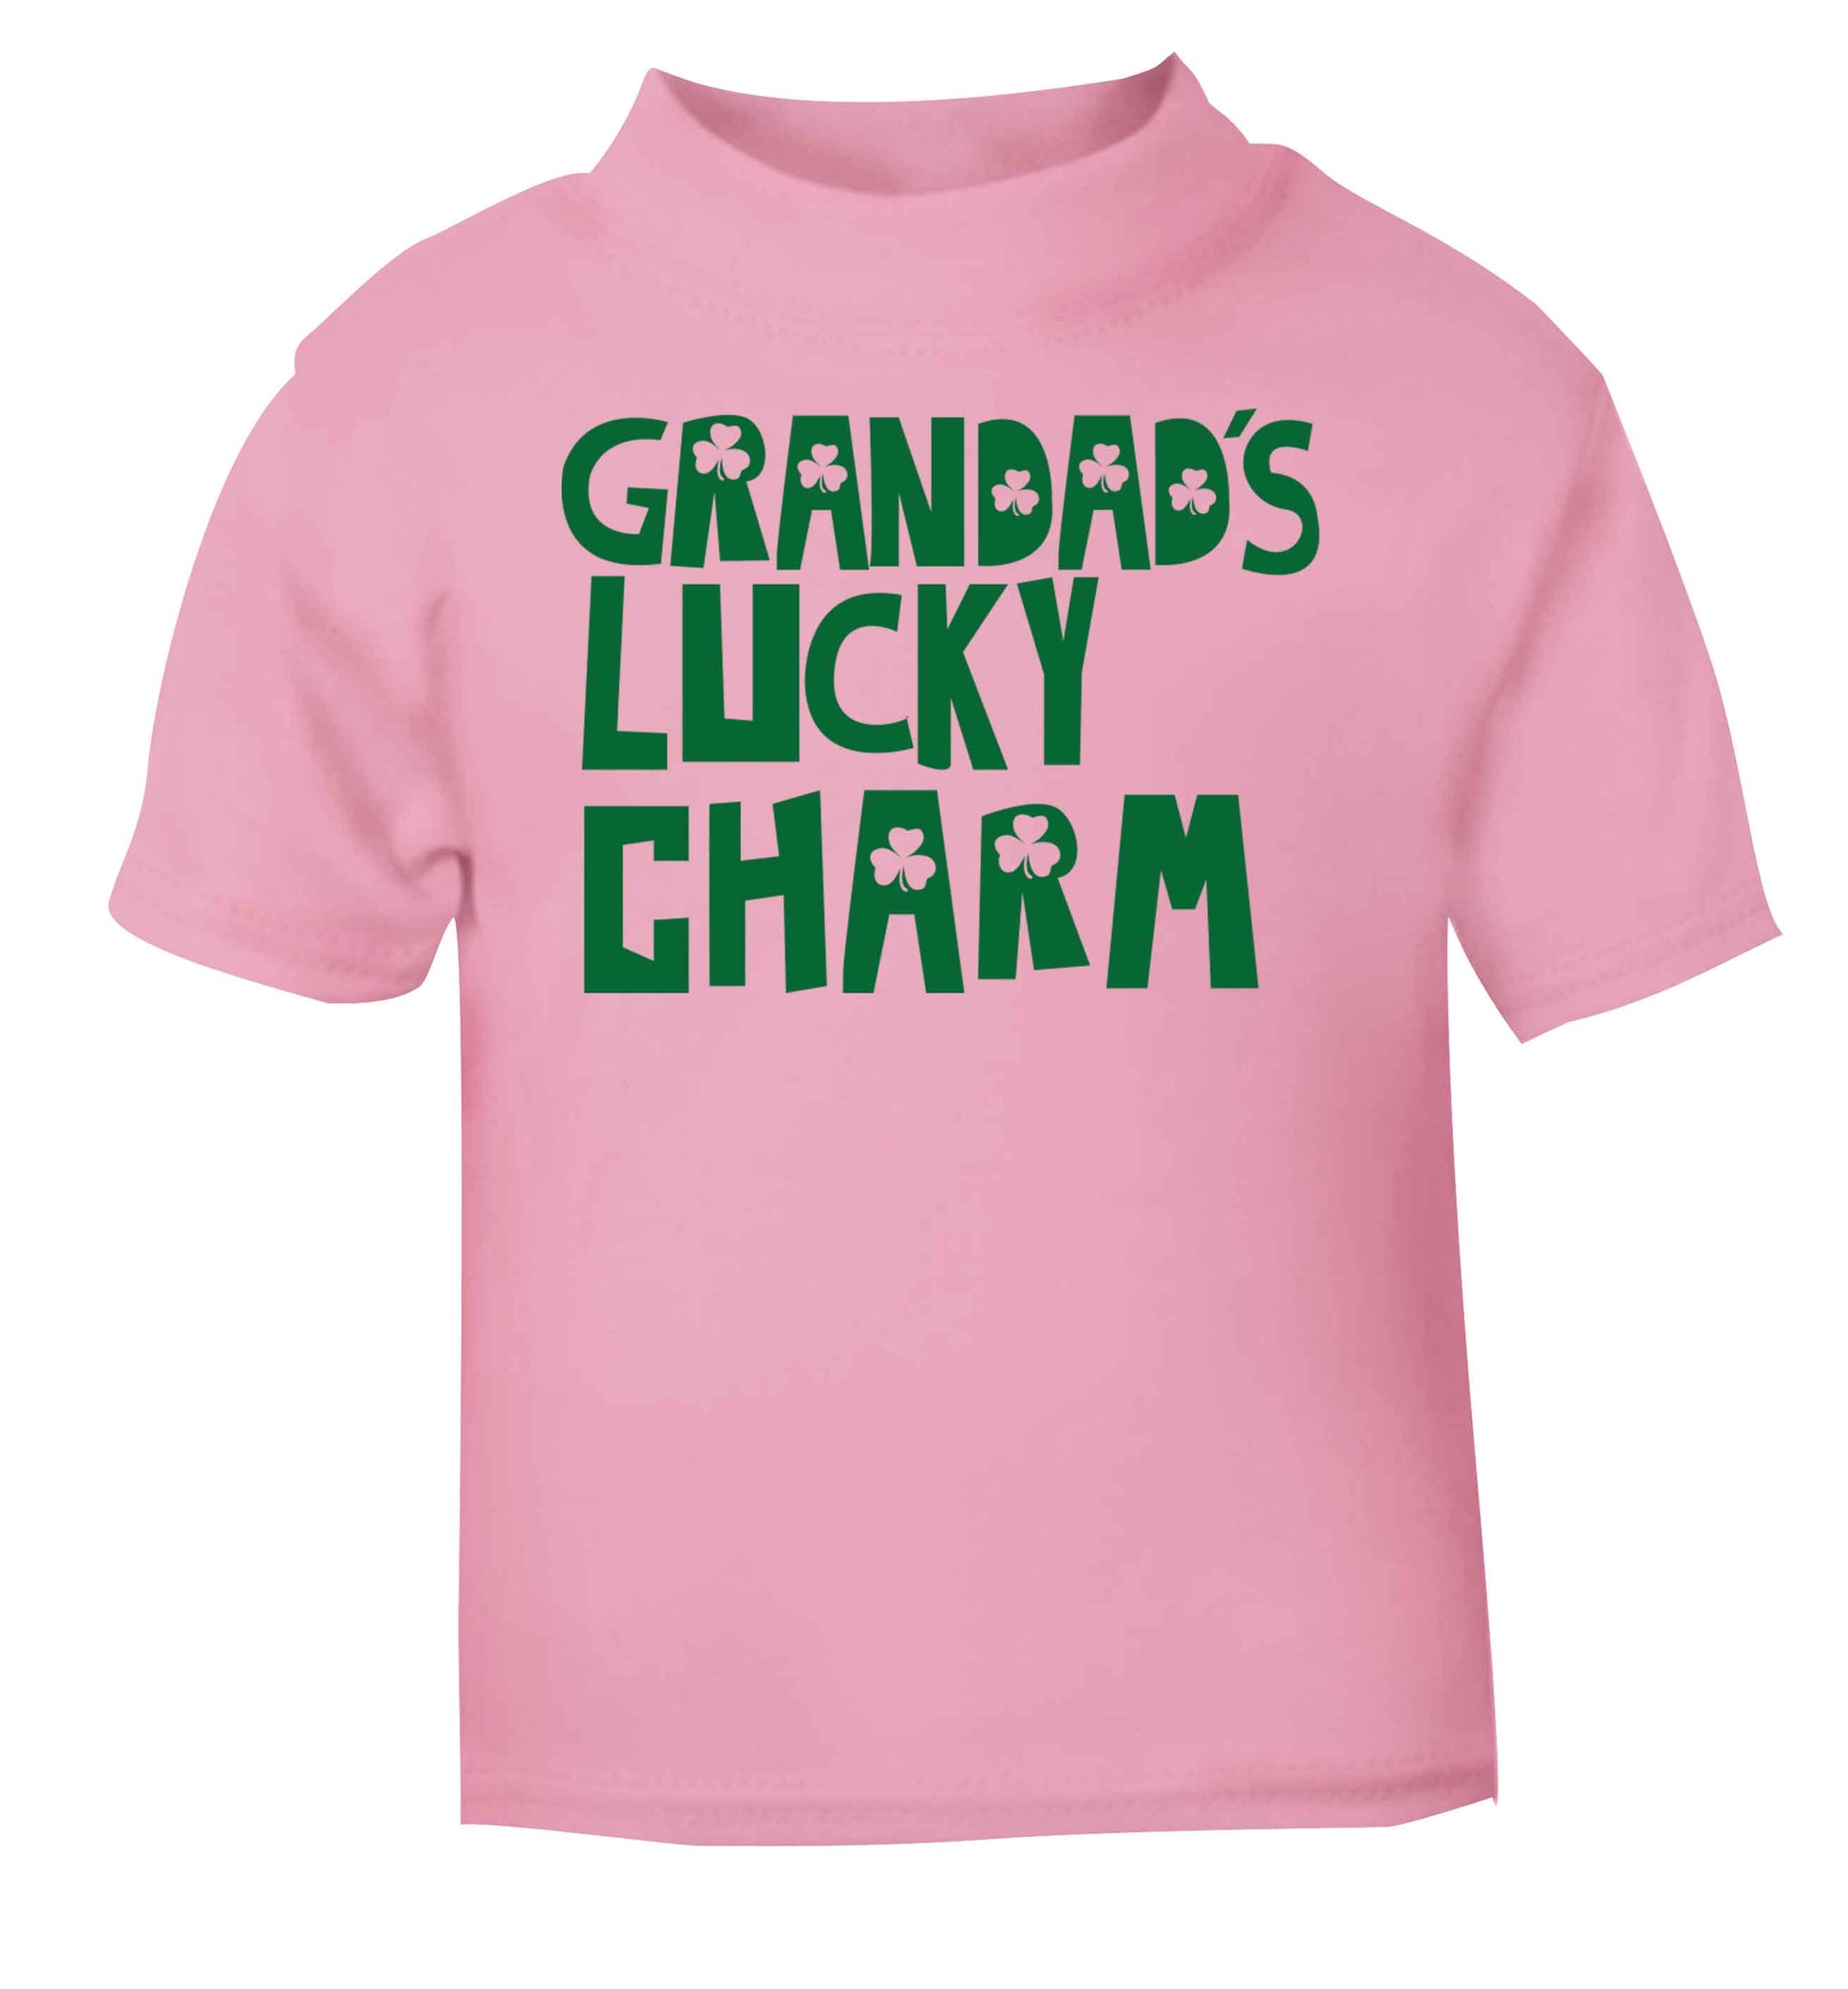 Grandad's lucky charm  light pink baby toddler Tshirt 2 Years